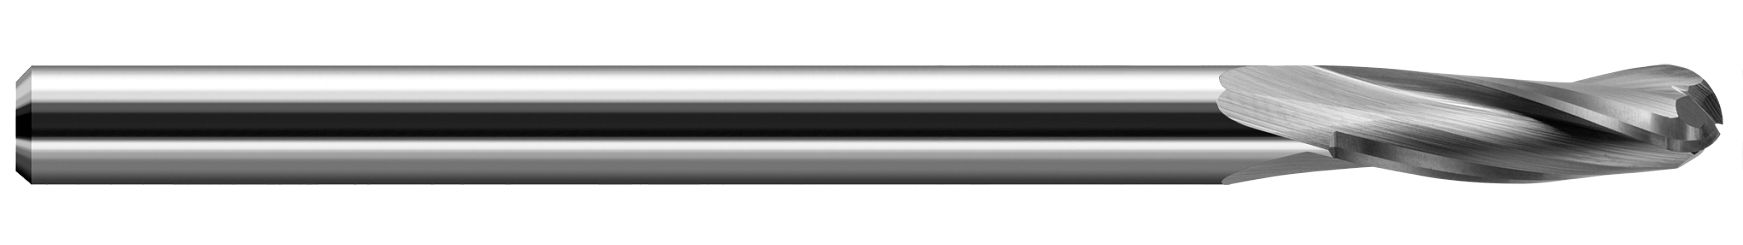 End Mills for Plastics-Finishers-Ball Upcut-3 Flute-Slow Helix